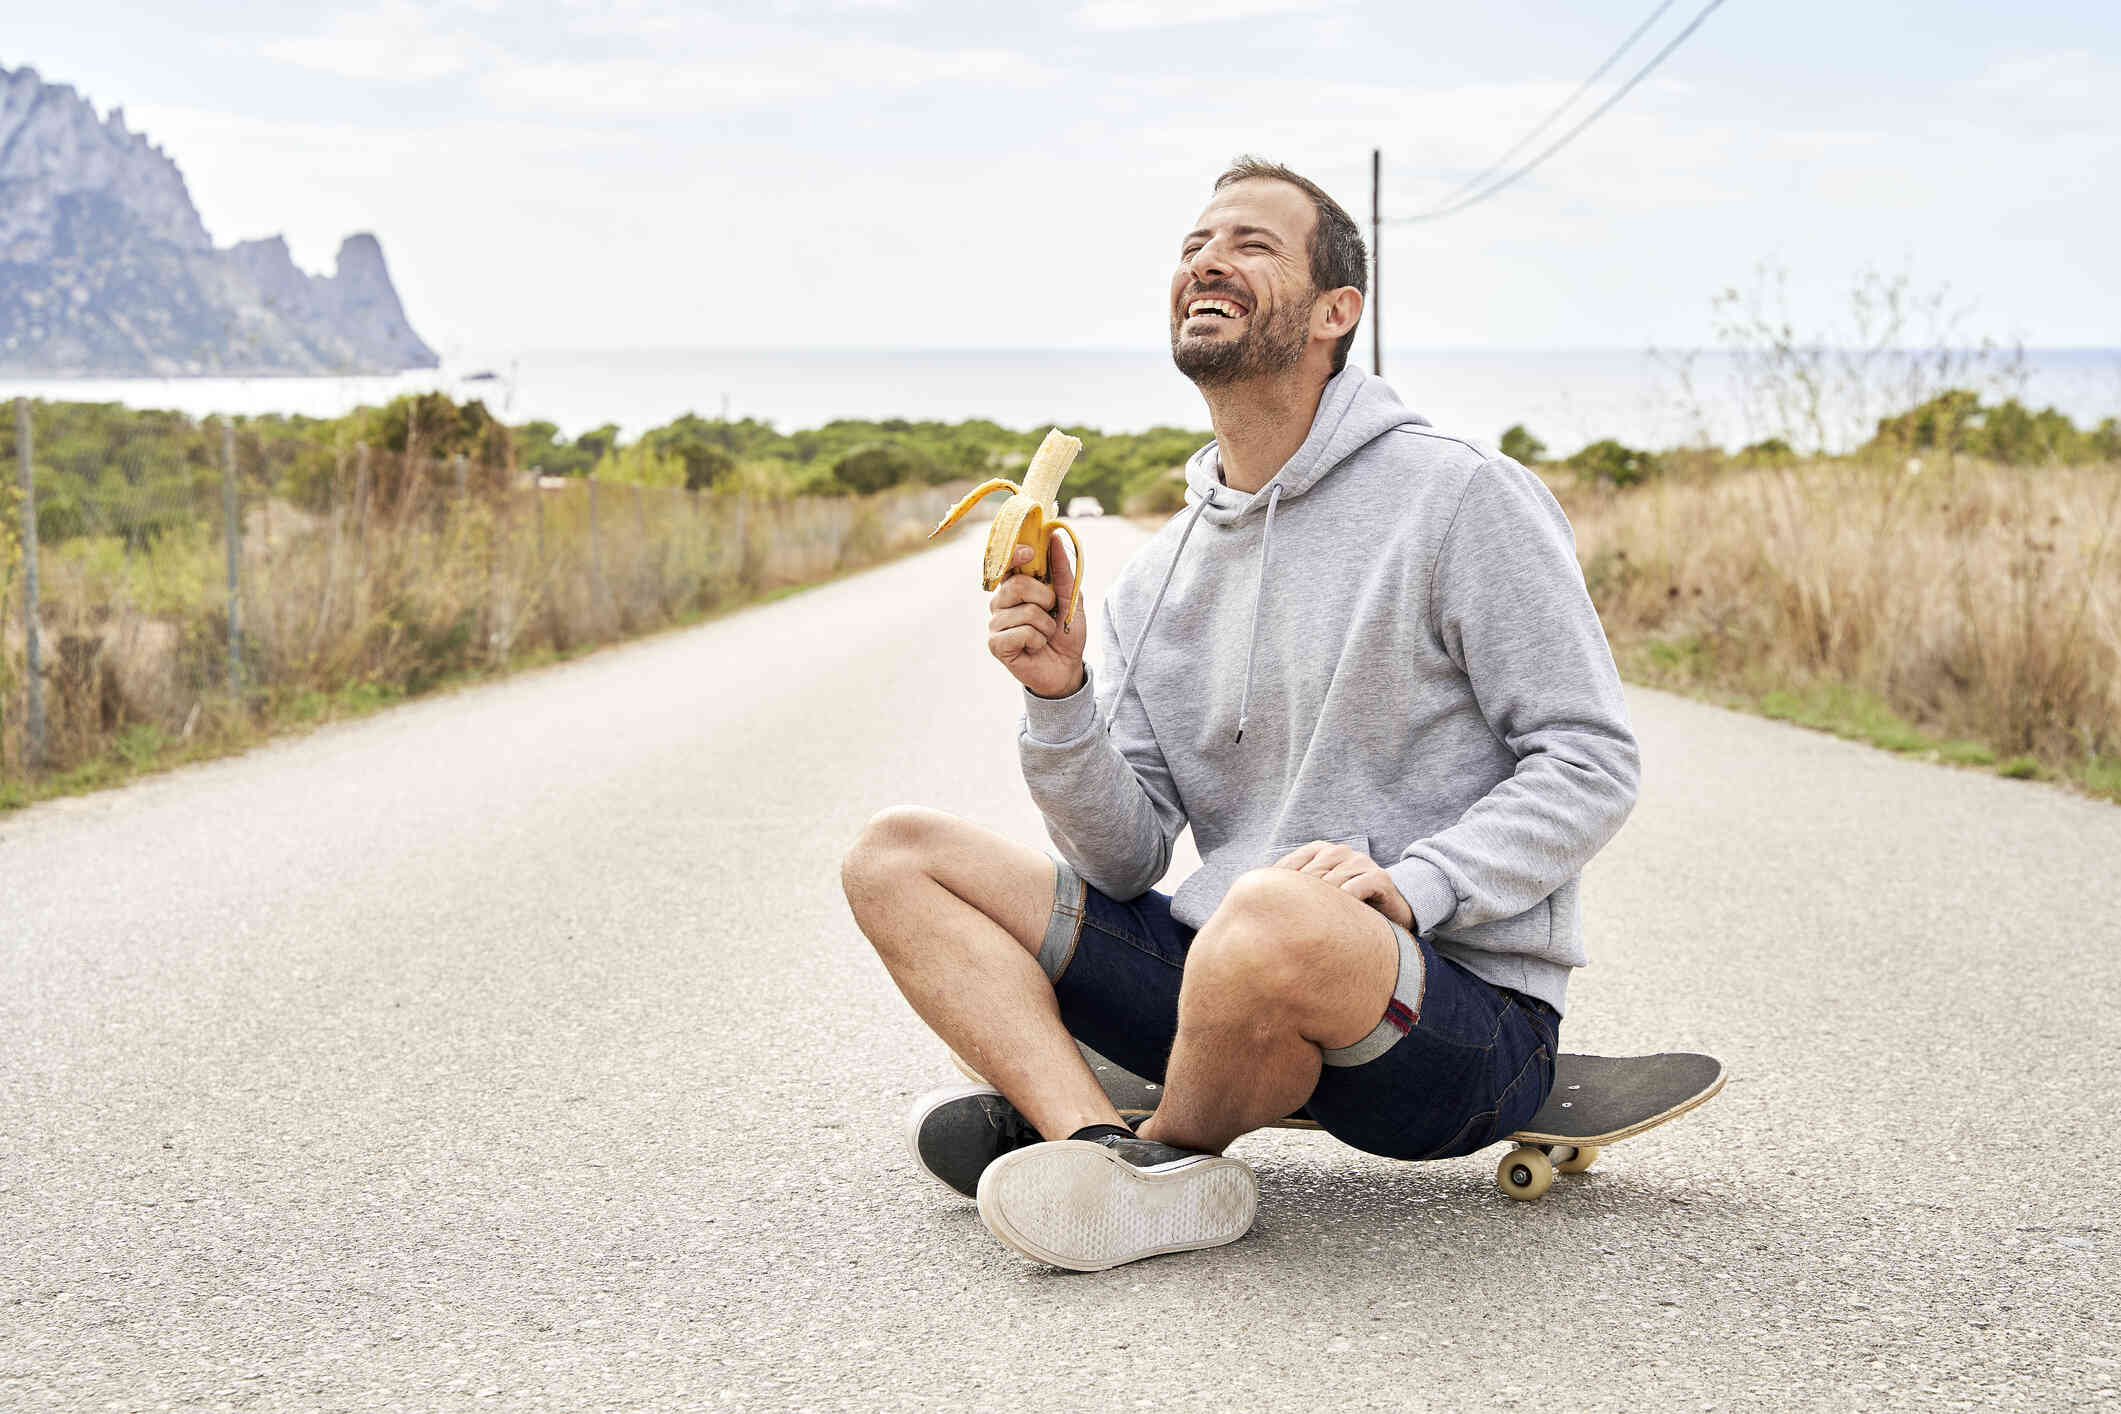 A man in a grey hoode sits outside on a skateboard while holding a banana and laughing on a sunny day.